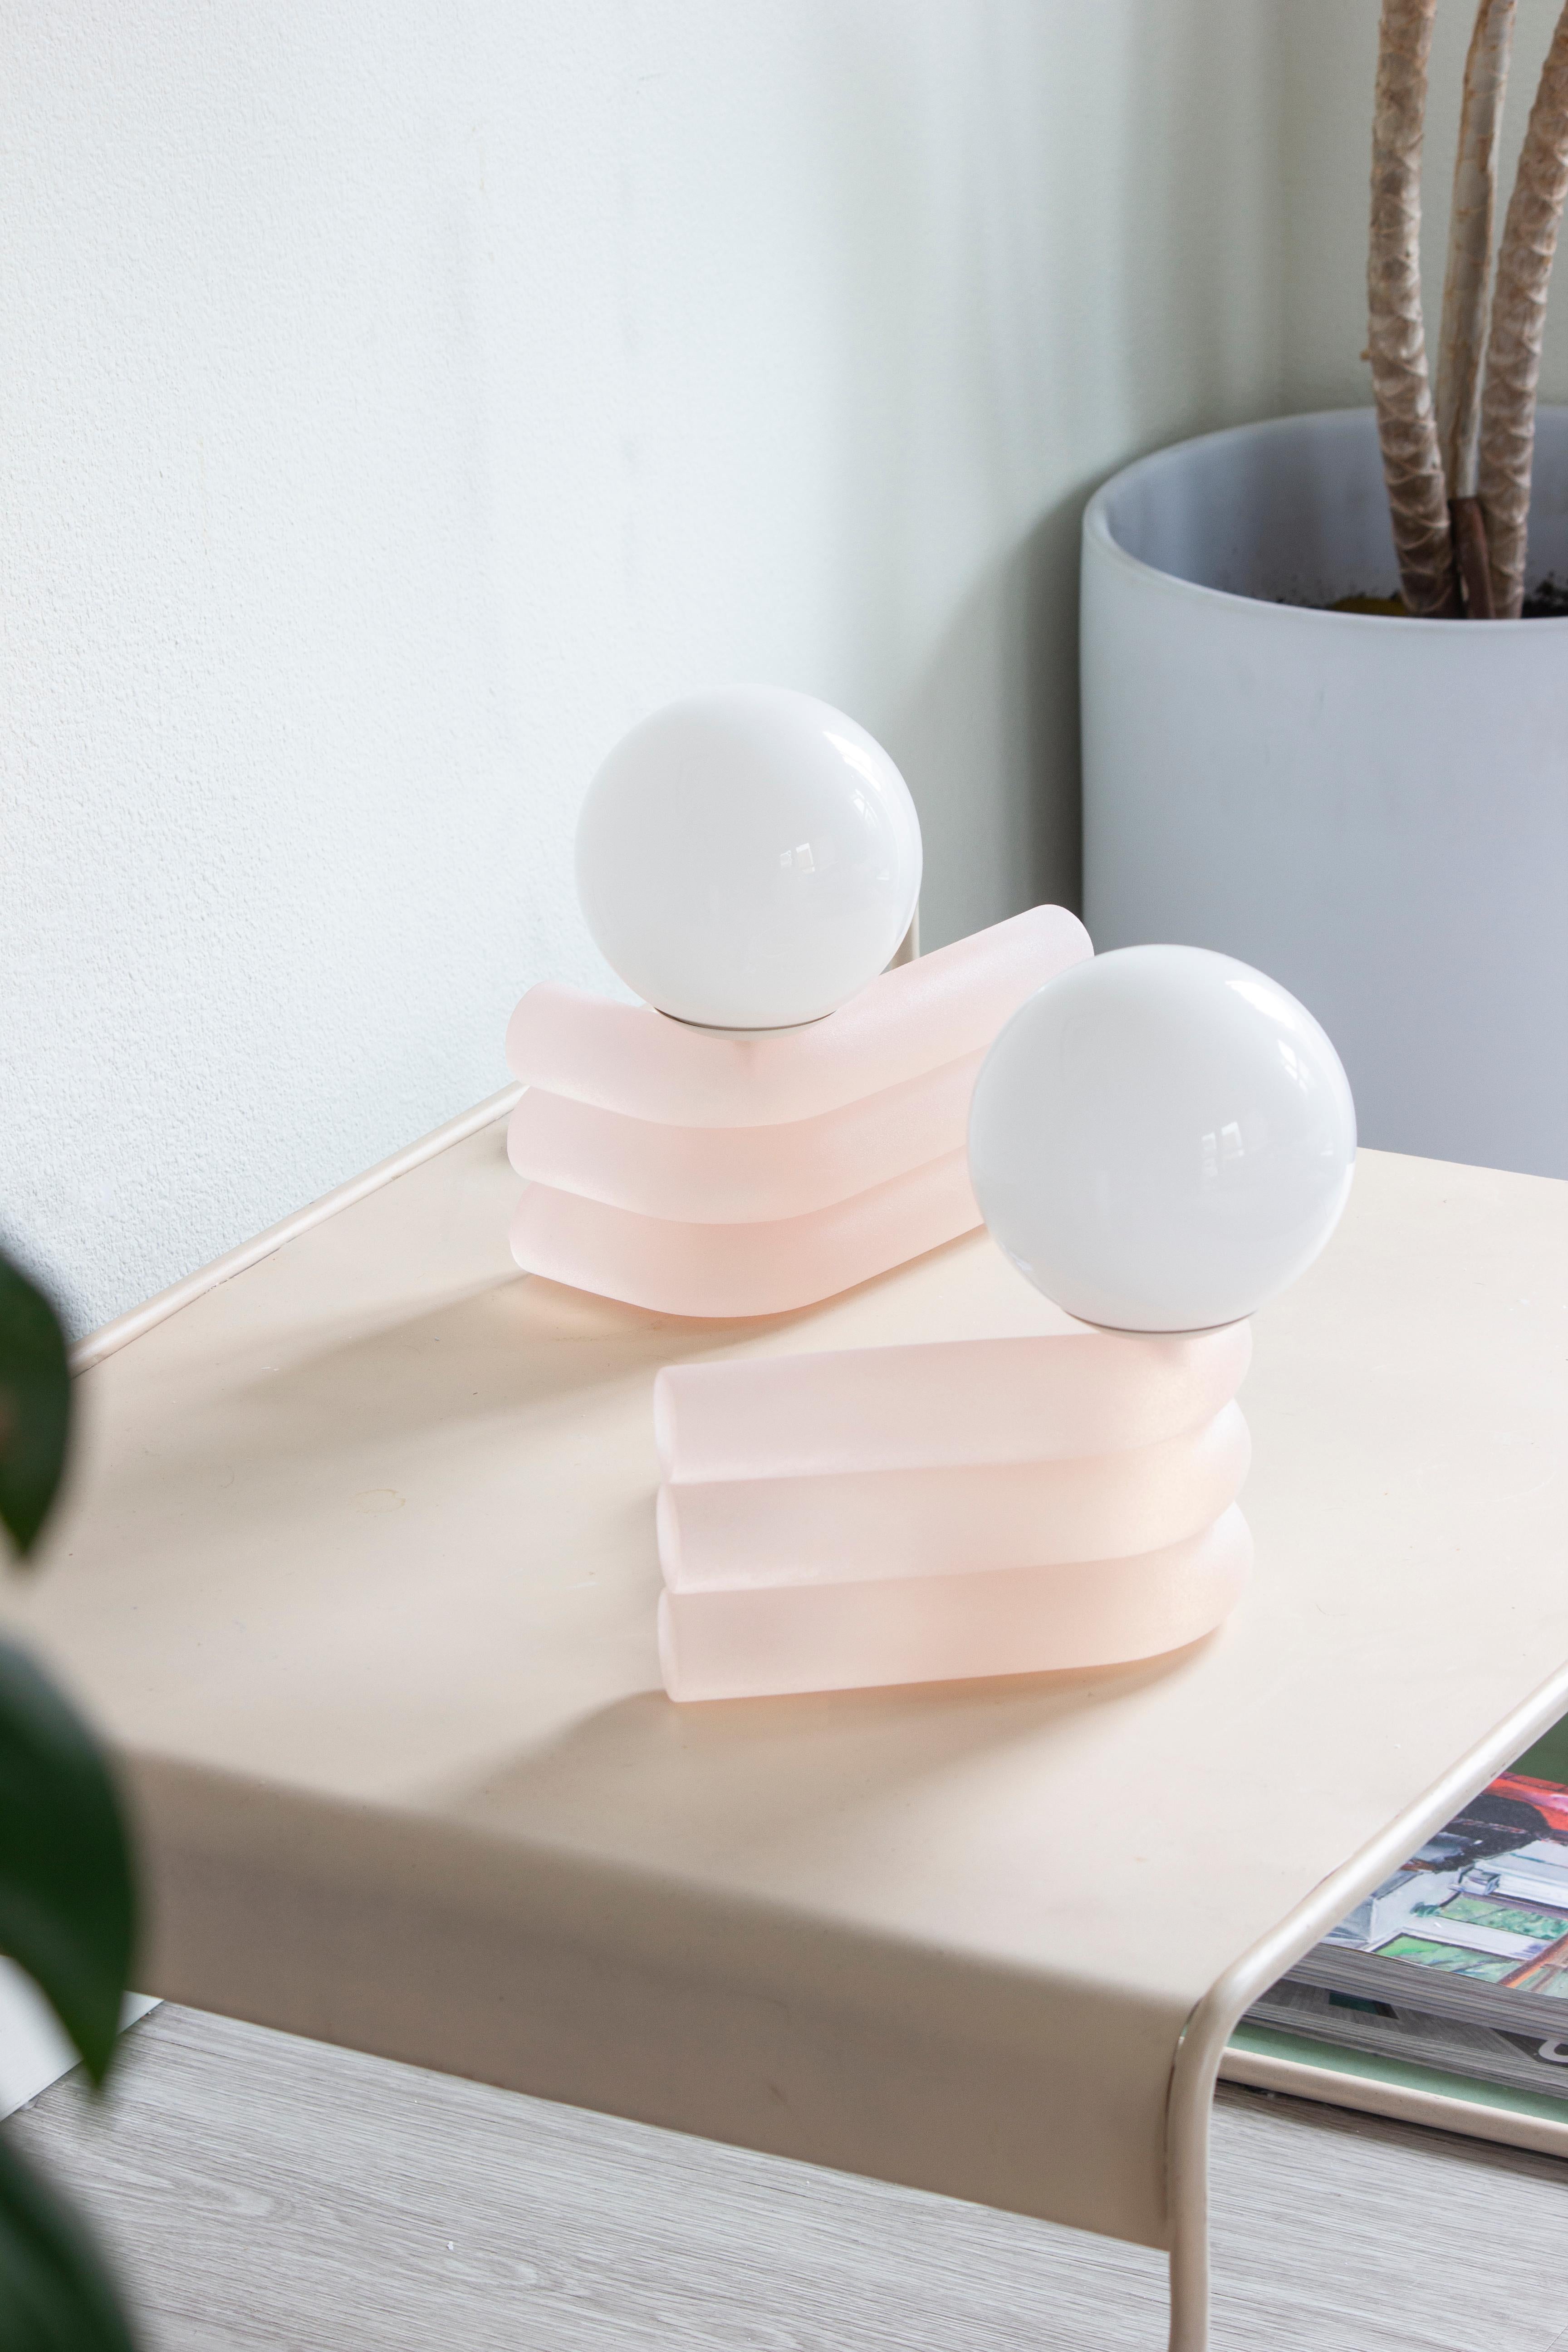 American Elio Resin Smart Table Lamp in Lychee by Soft Geometry, Small For Sale